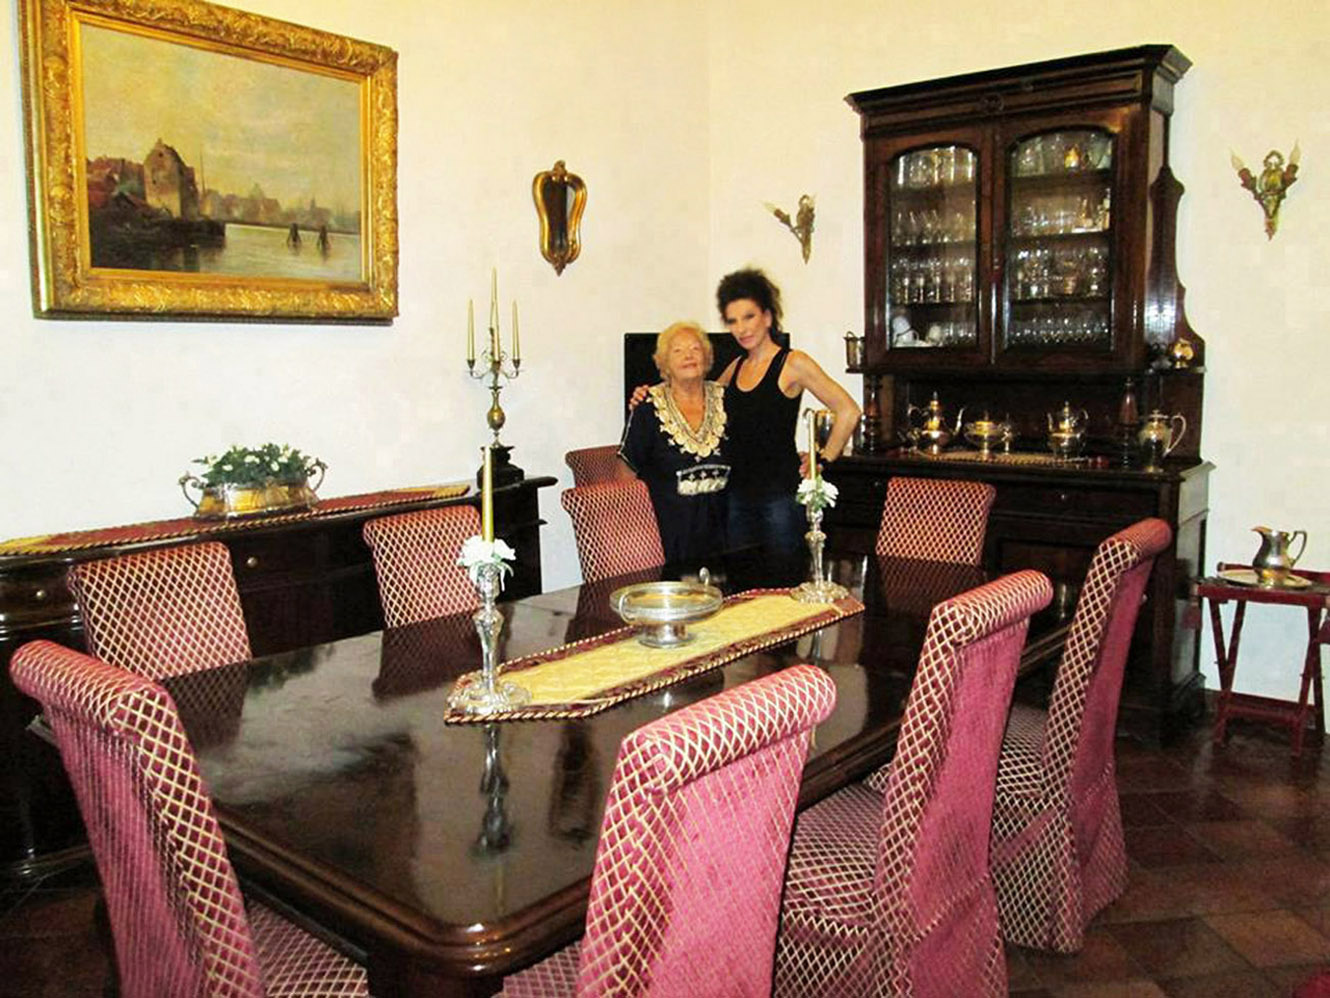 Lucia Aliberti with her mother "Teresa"⚘Family Home⚘Sicily⚘:http://www.luciaaliberti.it #luciaaliberti #familyhome #sicily #mother